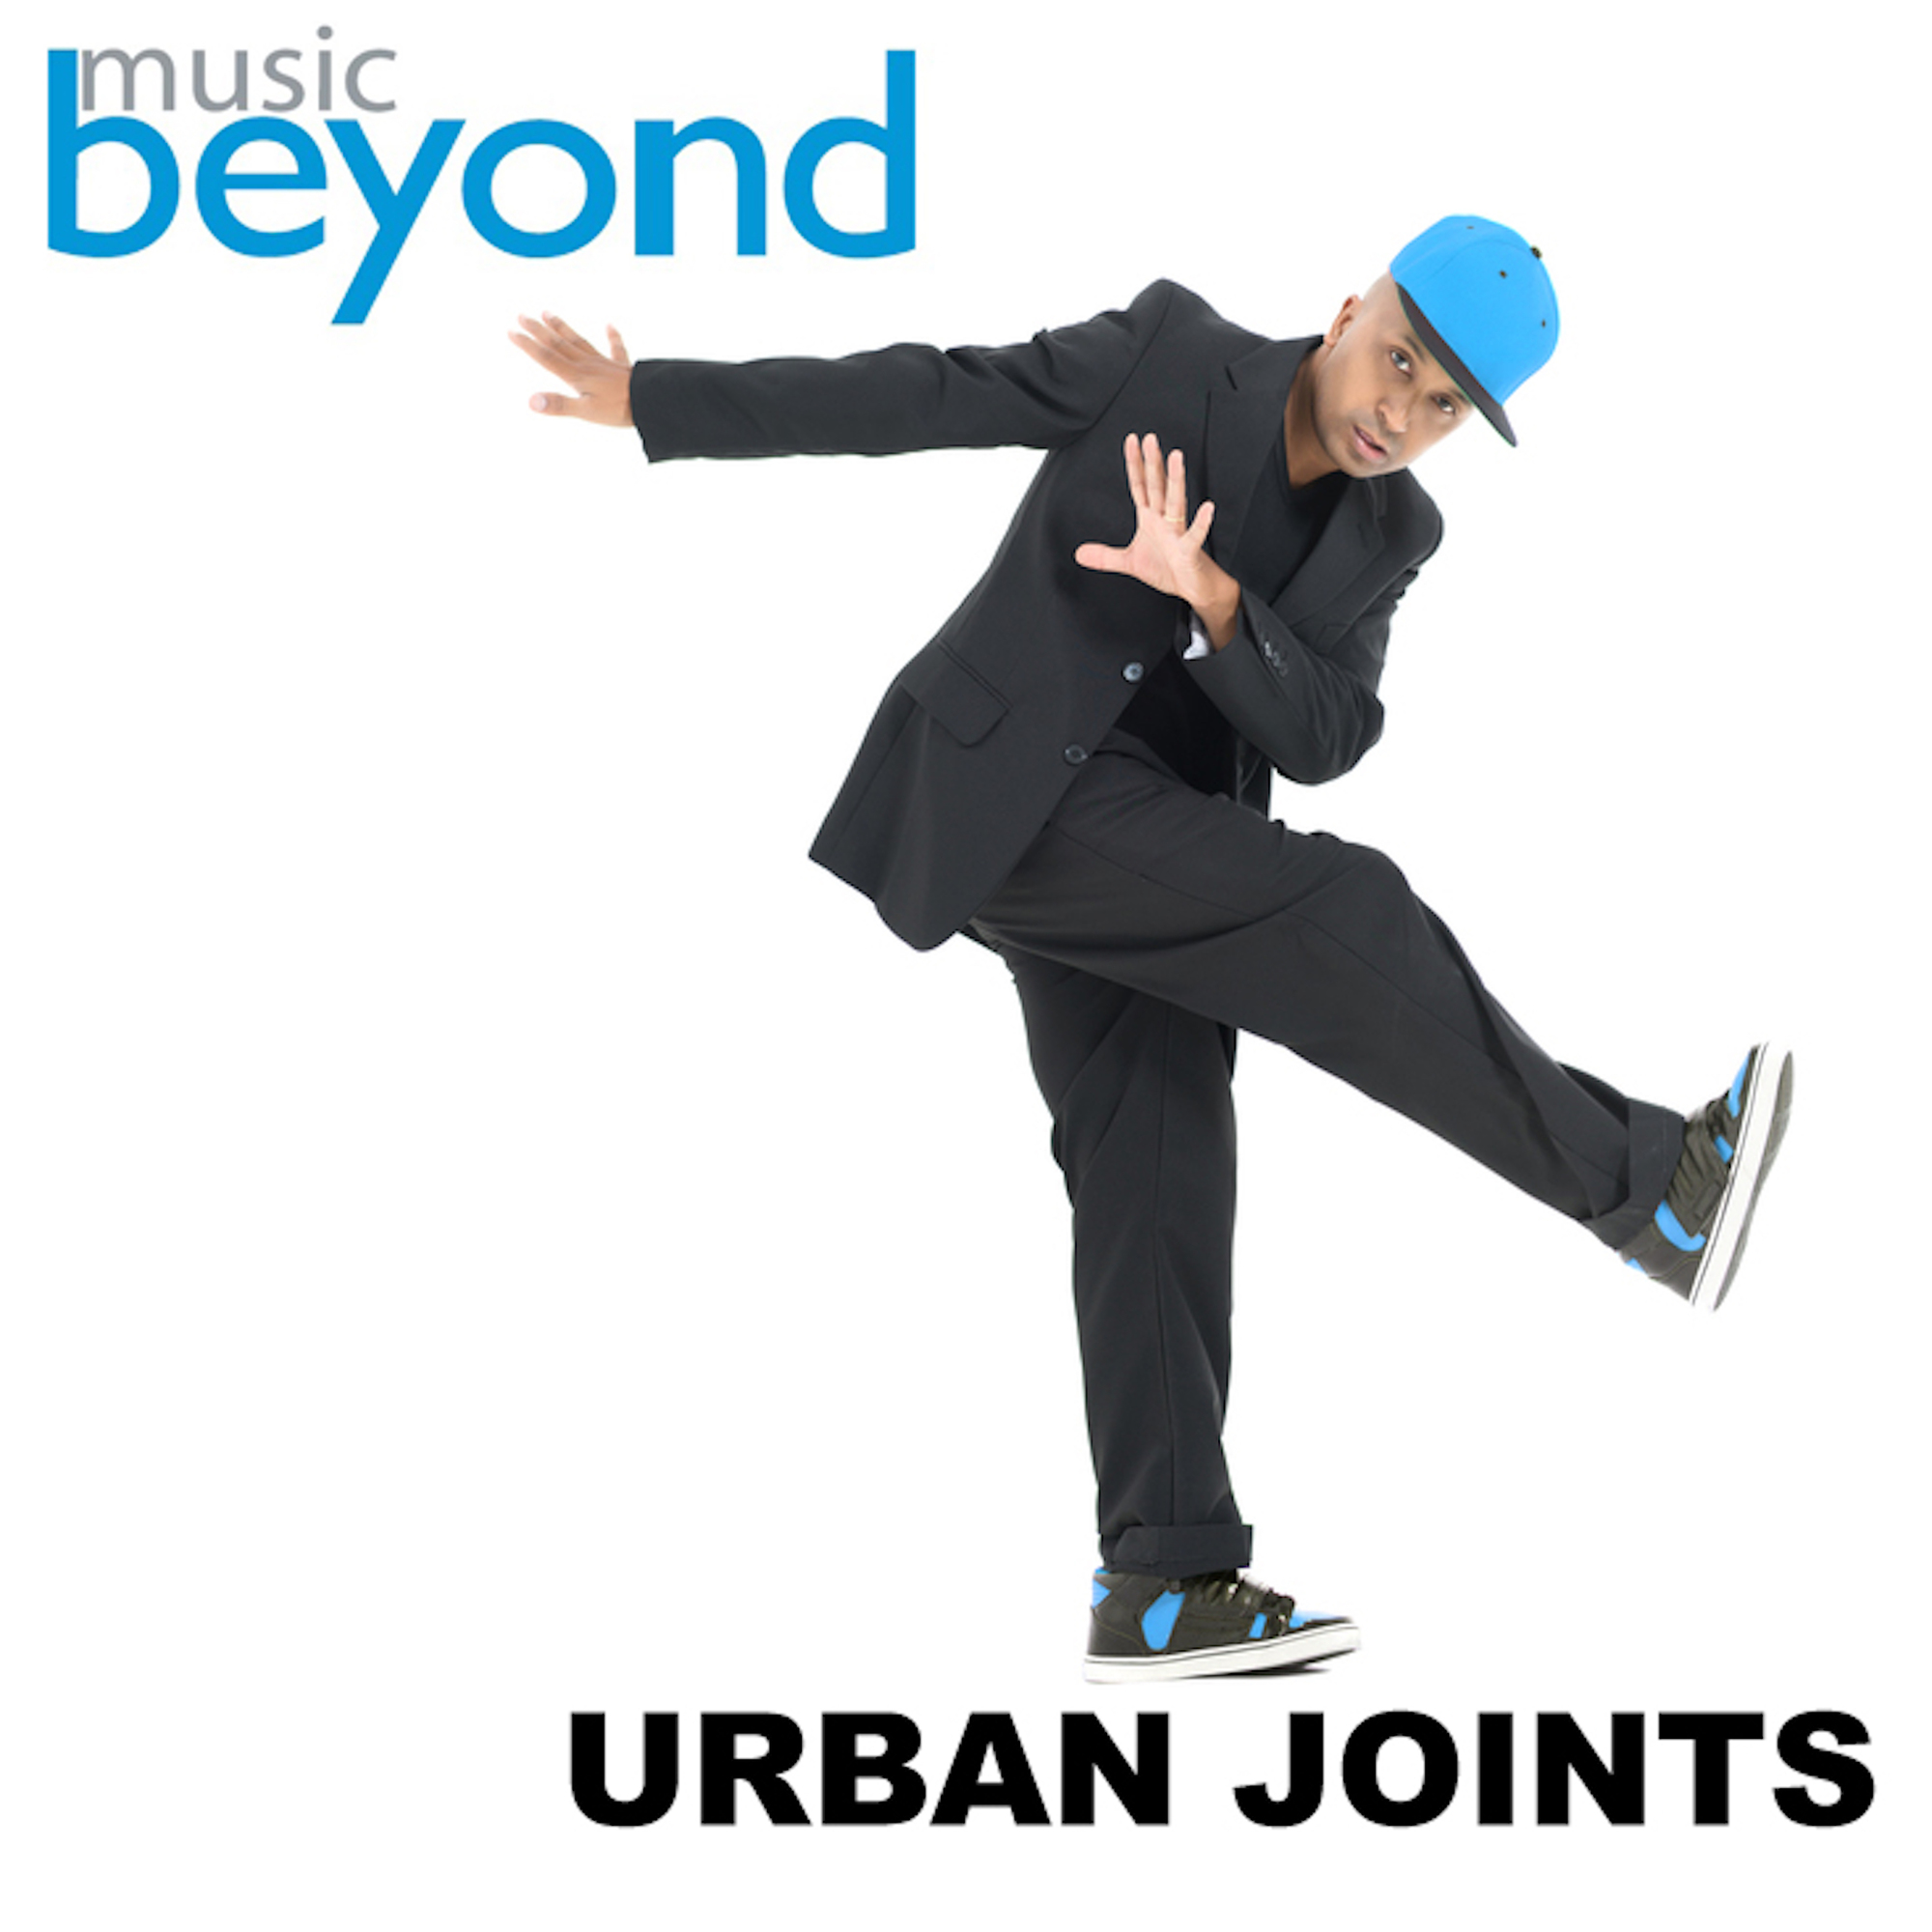 Urban Joints